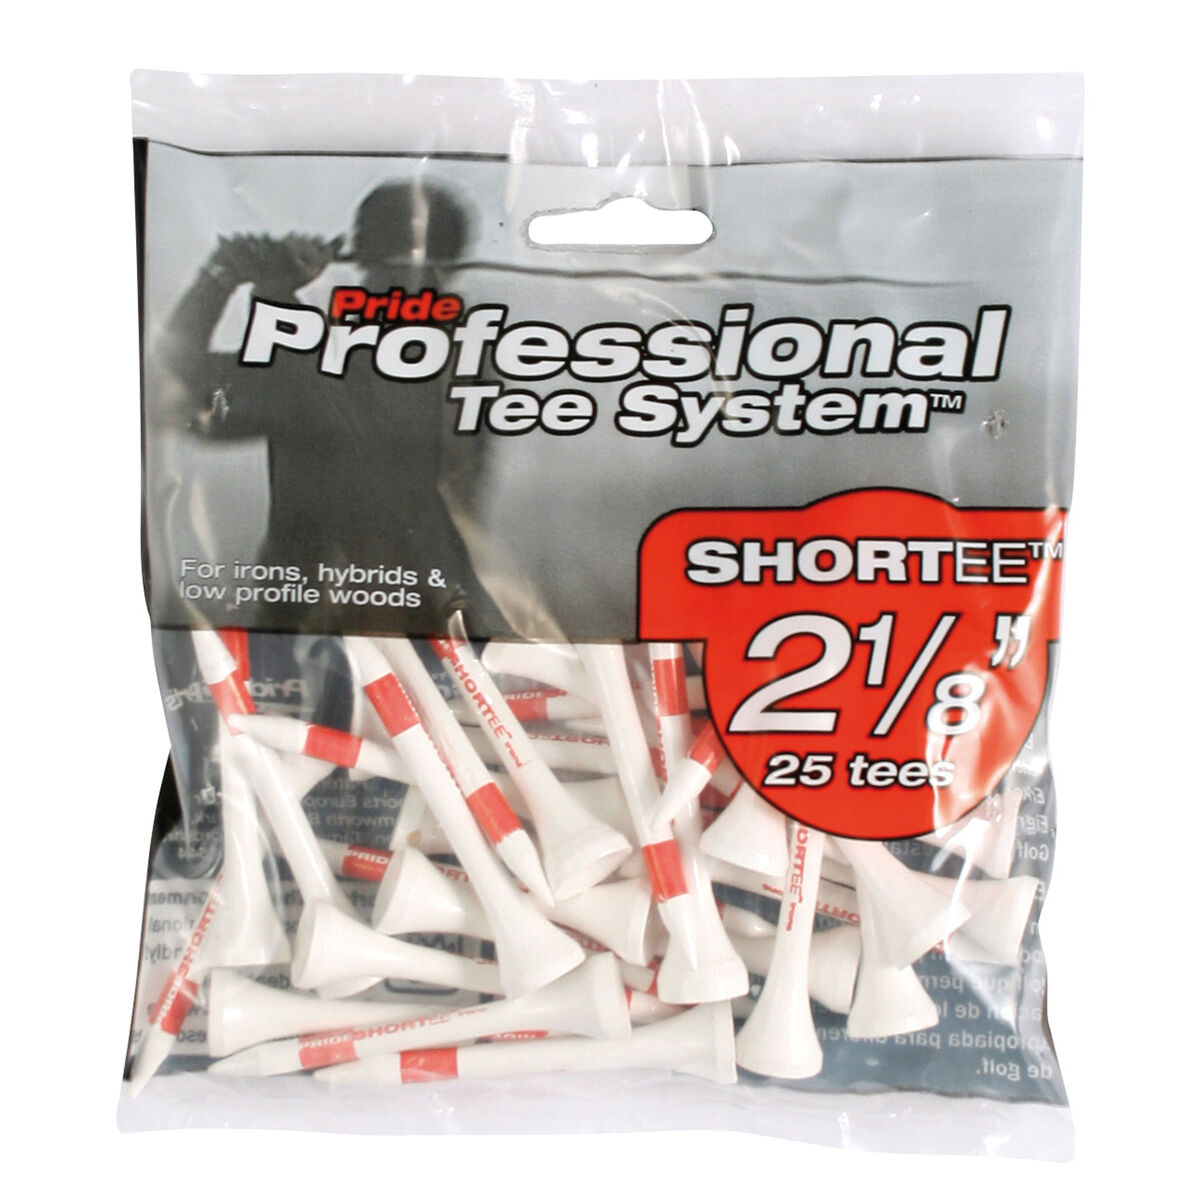 Pride Red Professional Golf Tees, Size: 2 1/8", 2 1/8 inches | American Golf